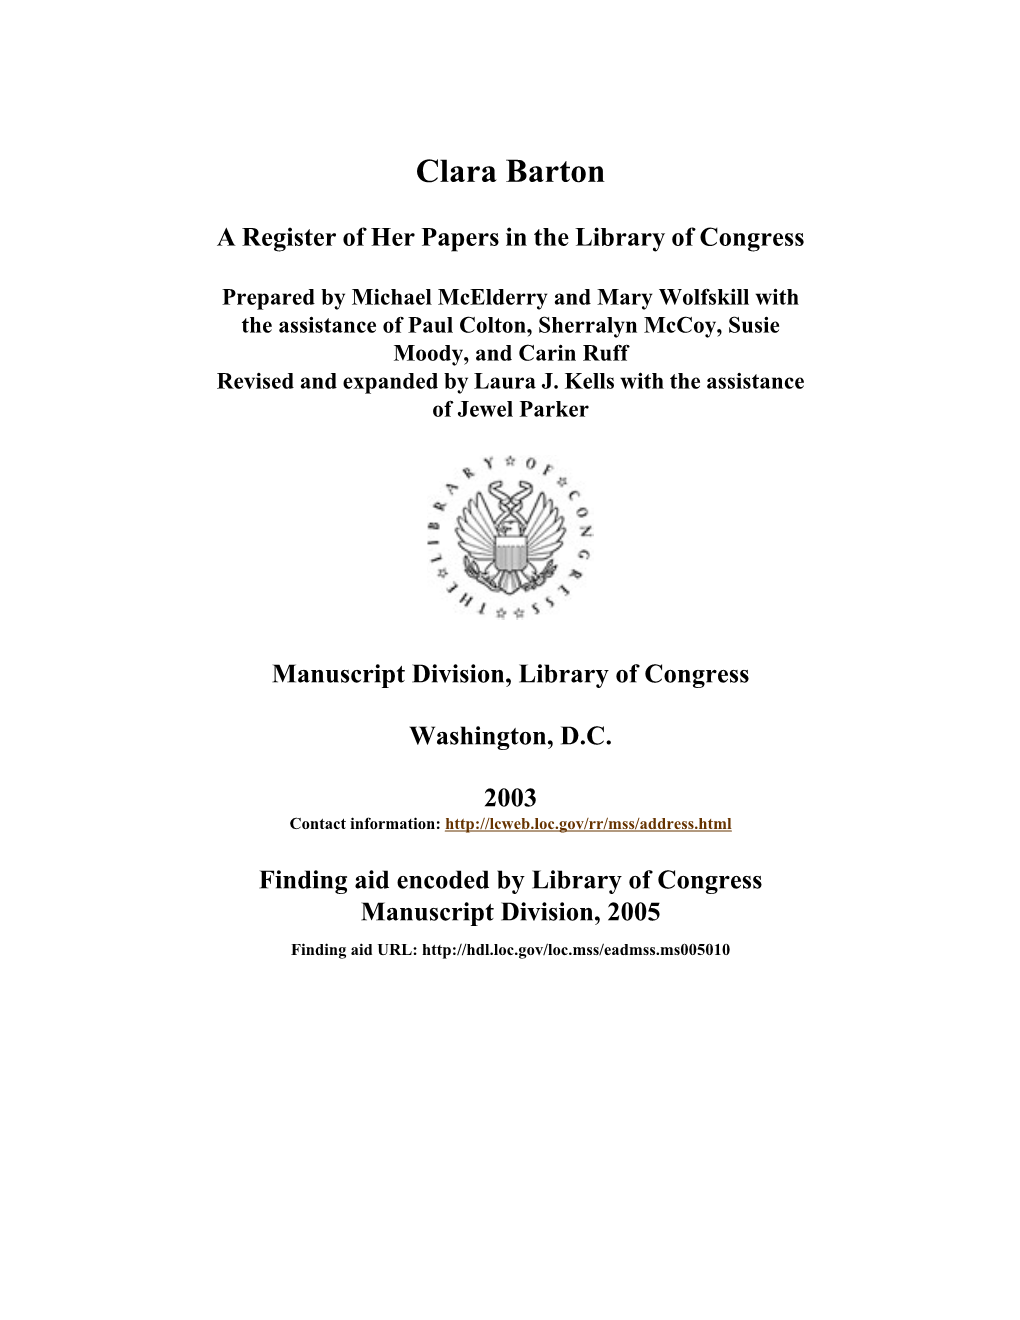 Papers of Clara Barton [Finding Aid]. Library of Congress